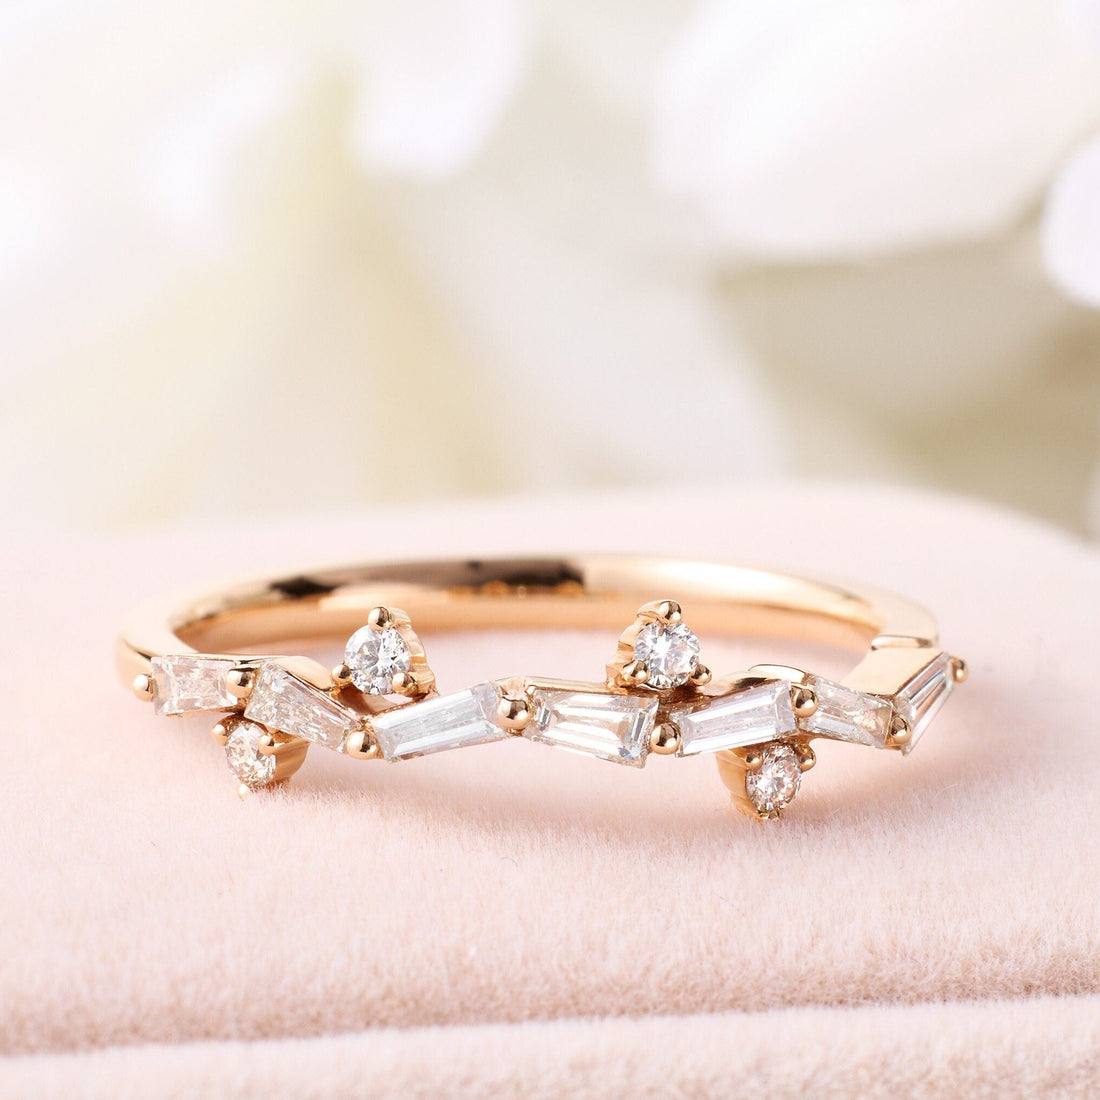 Petite Diamond and Gemstone Stackable Ring